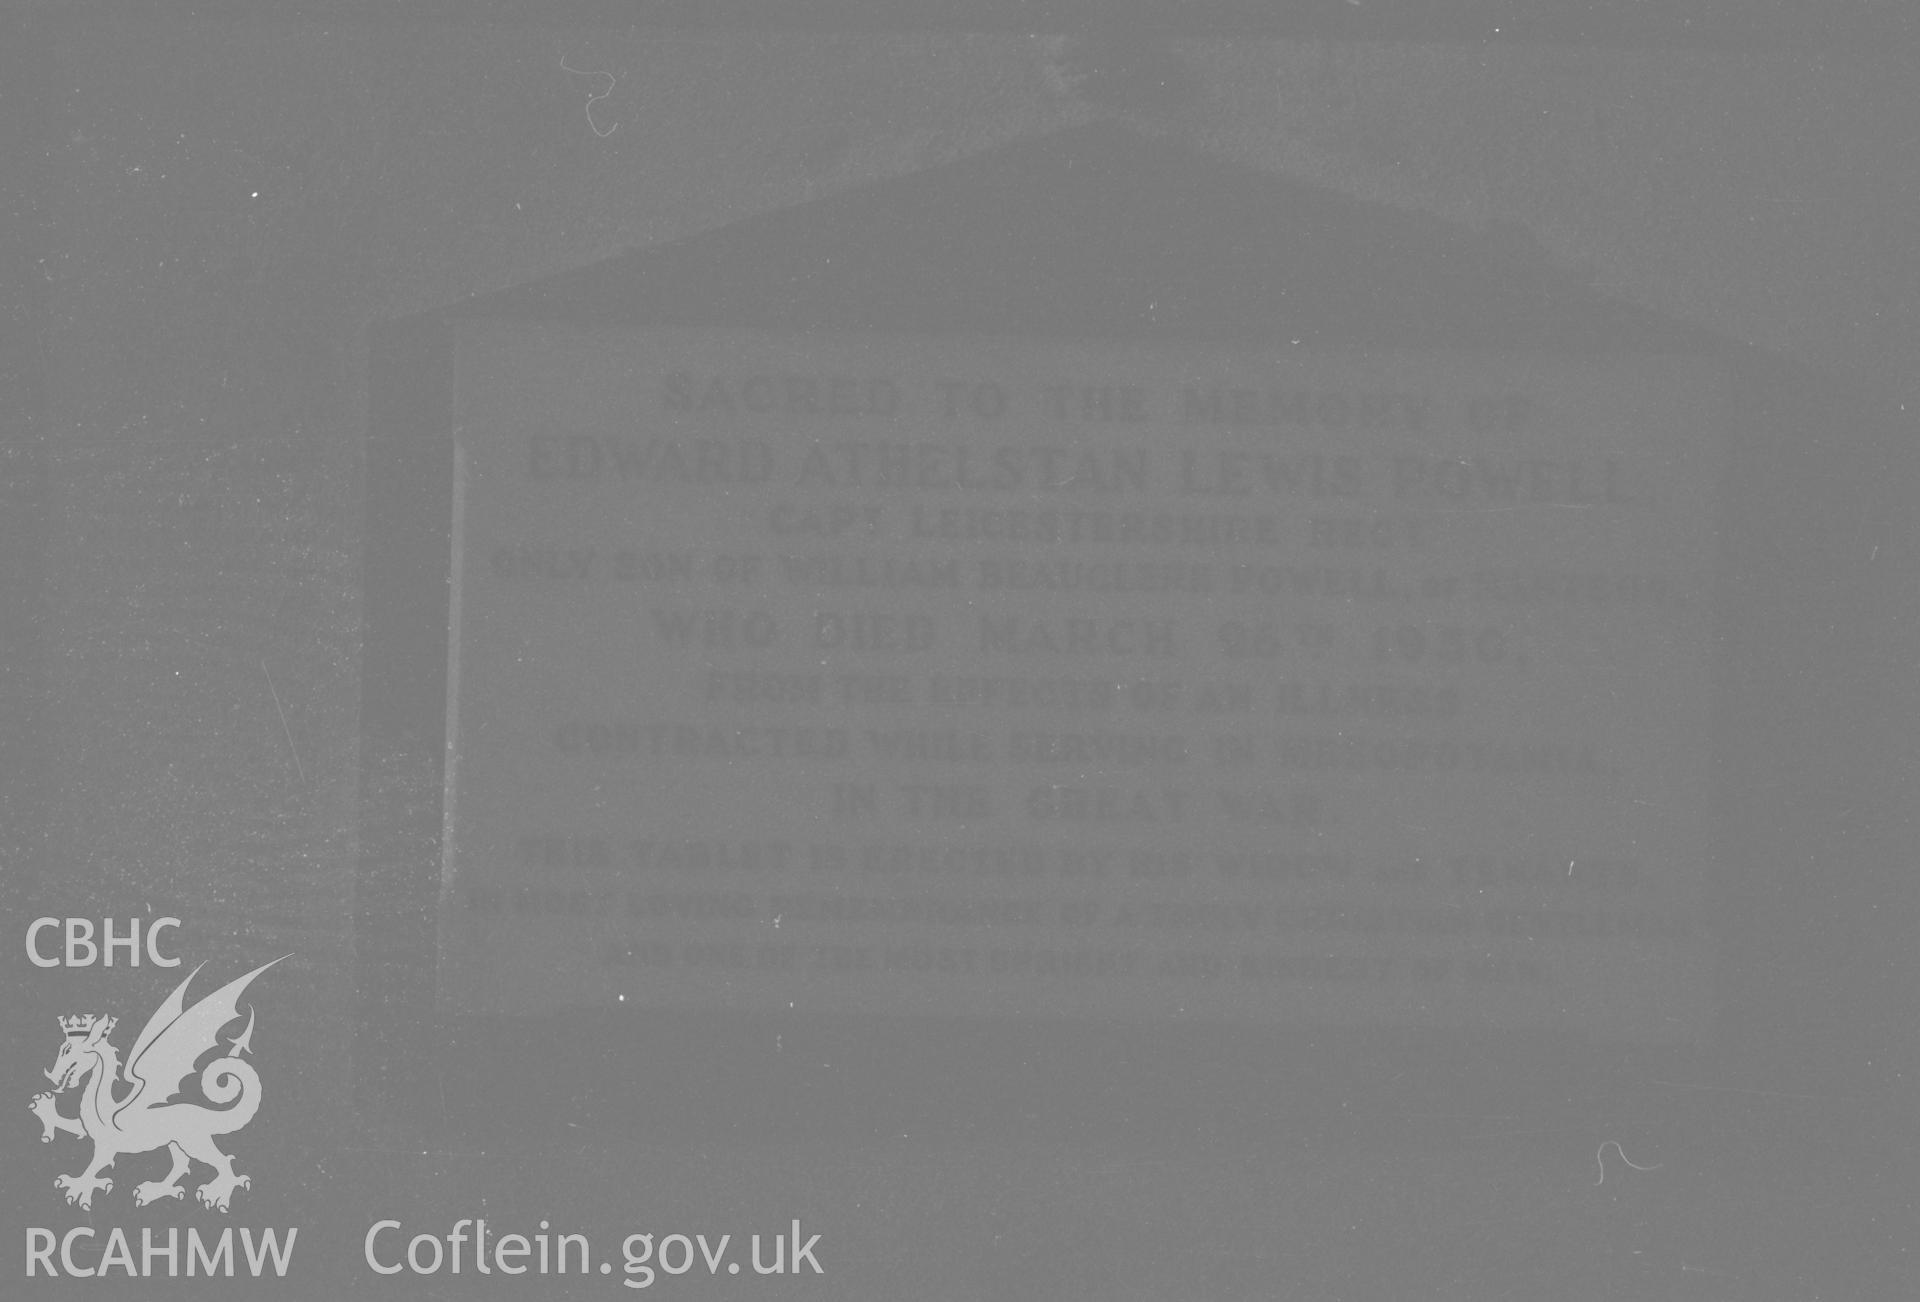 Digital copy of a black and white negative showing poor quality image of memorial to the Powell family in St. Padarn's church, Llanbadarn, Aberystwyth. Photographed by Arthur O. Chater on 19th August 1967.